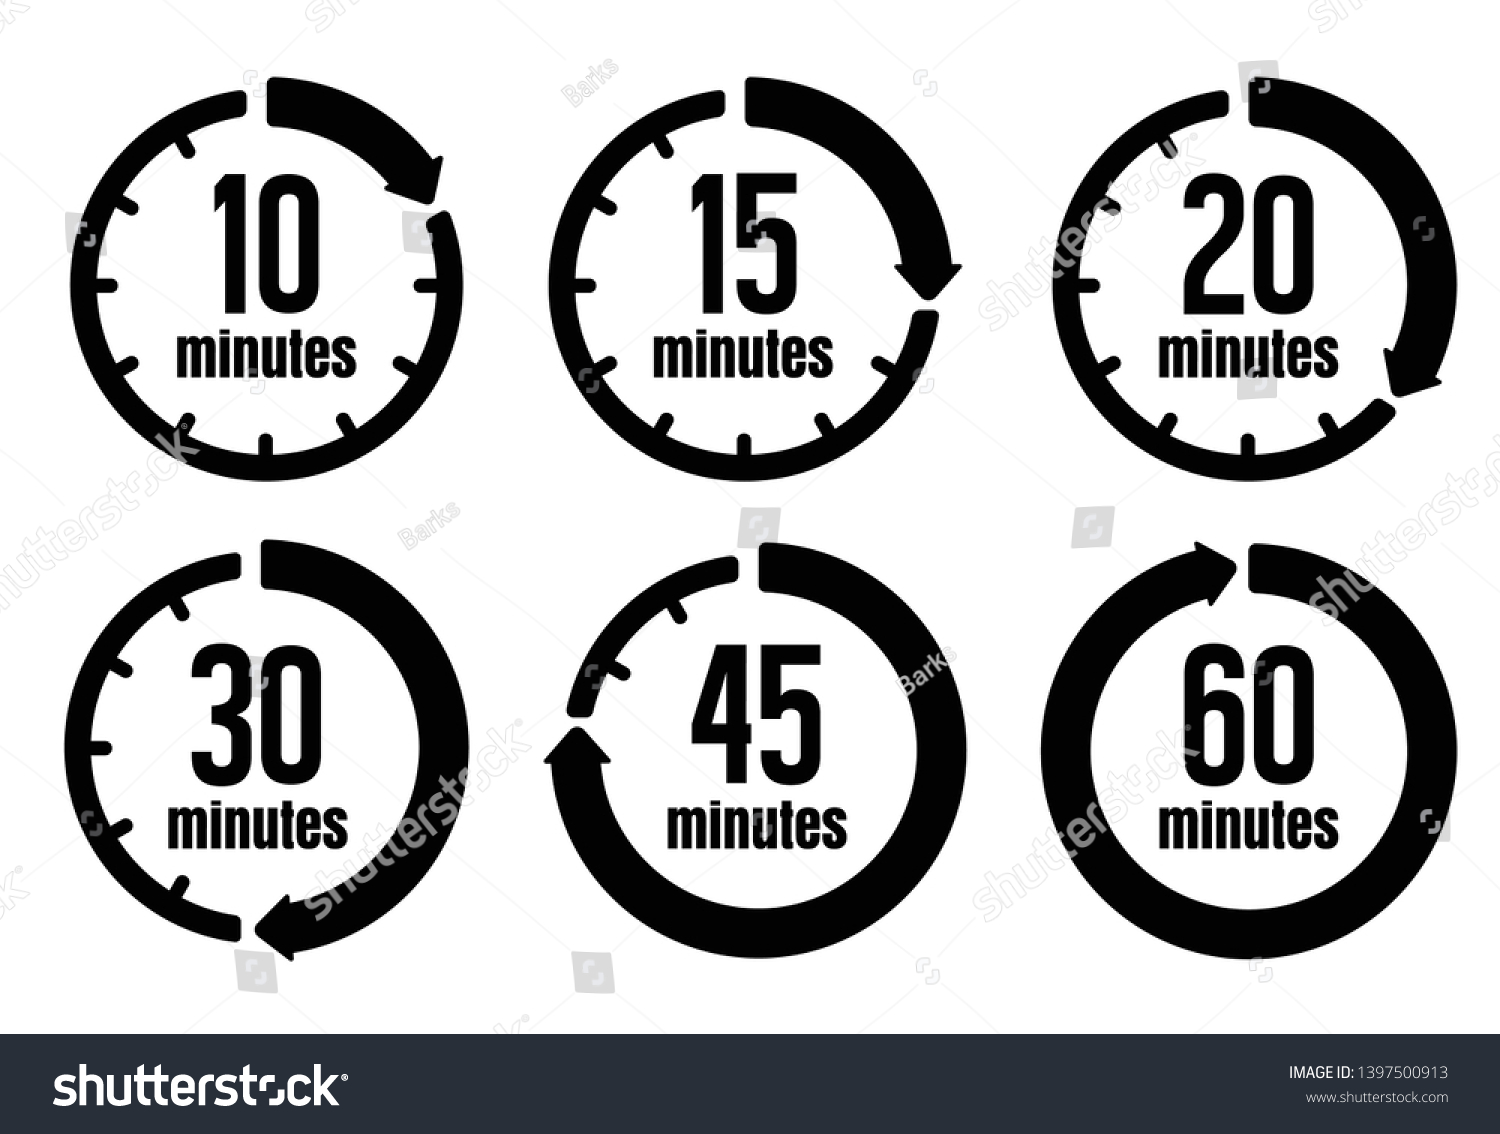 Clock , timer (time passage) icon set ( form 10 minutes to 60 minutes) #1397500913